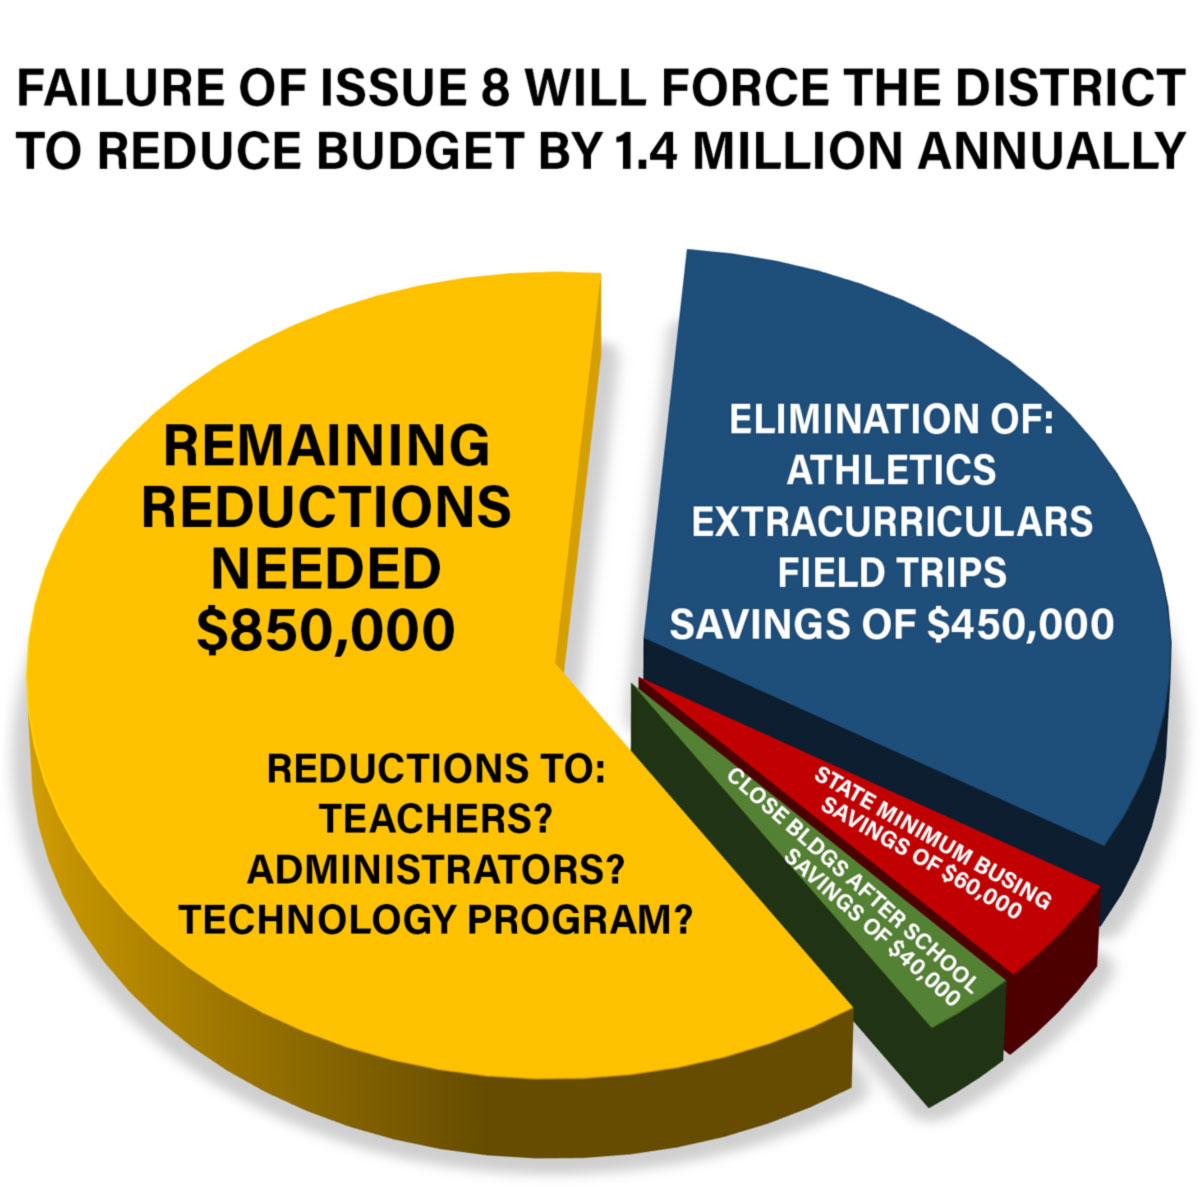 Failure of Issue 8 on November 6, 2018 will force the district to reduce the budget by $1.4 million annually. 